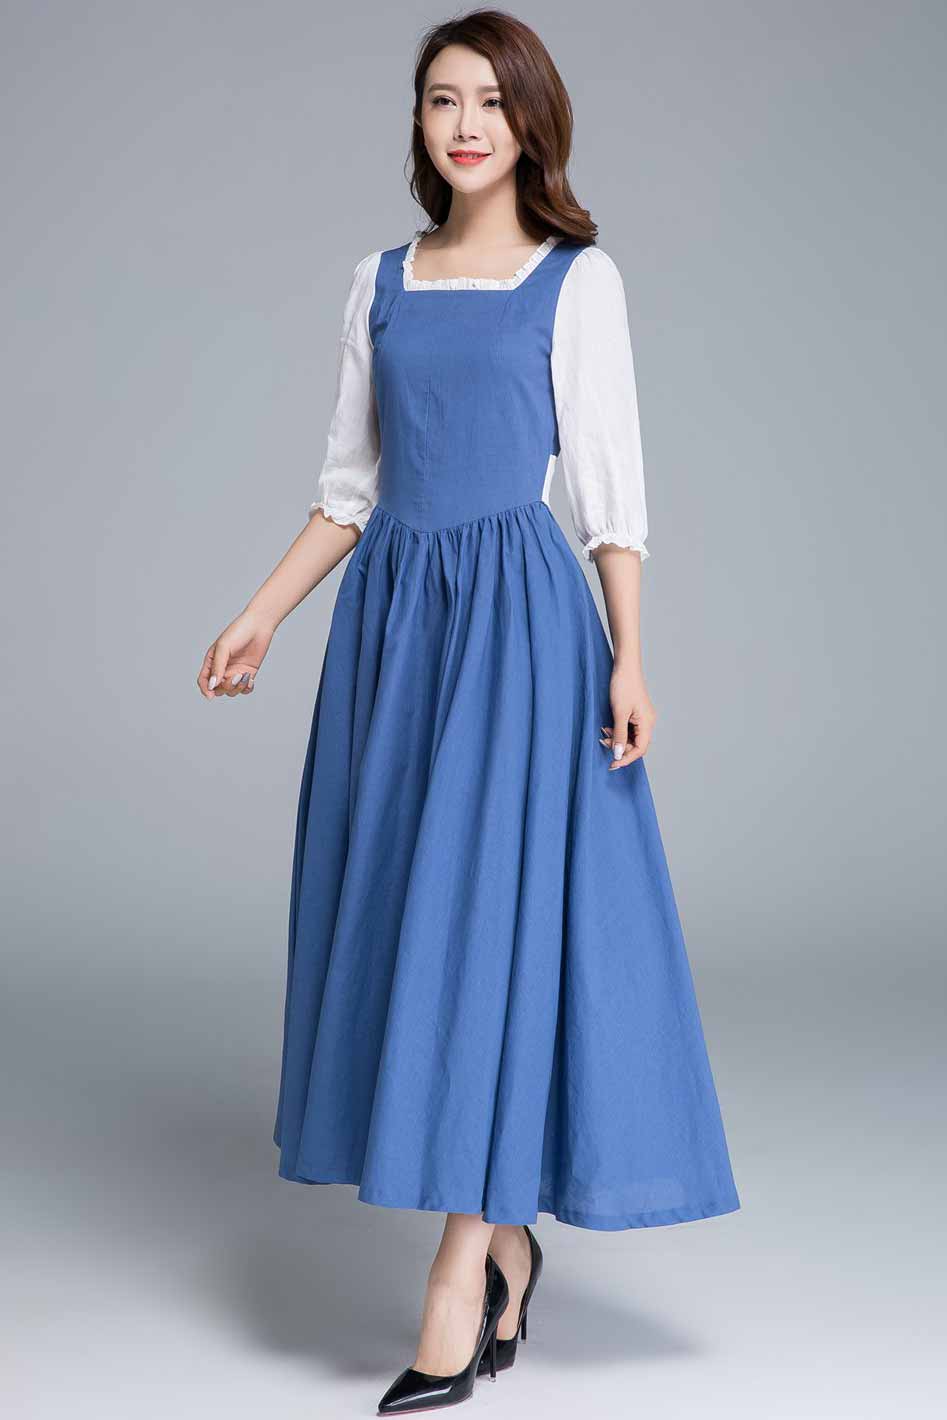 Blue linen fit and flare princess dress 1659#